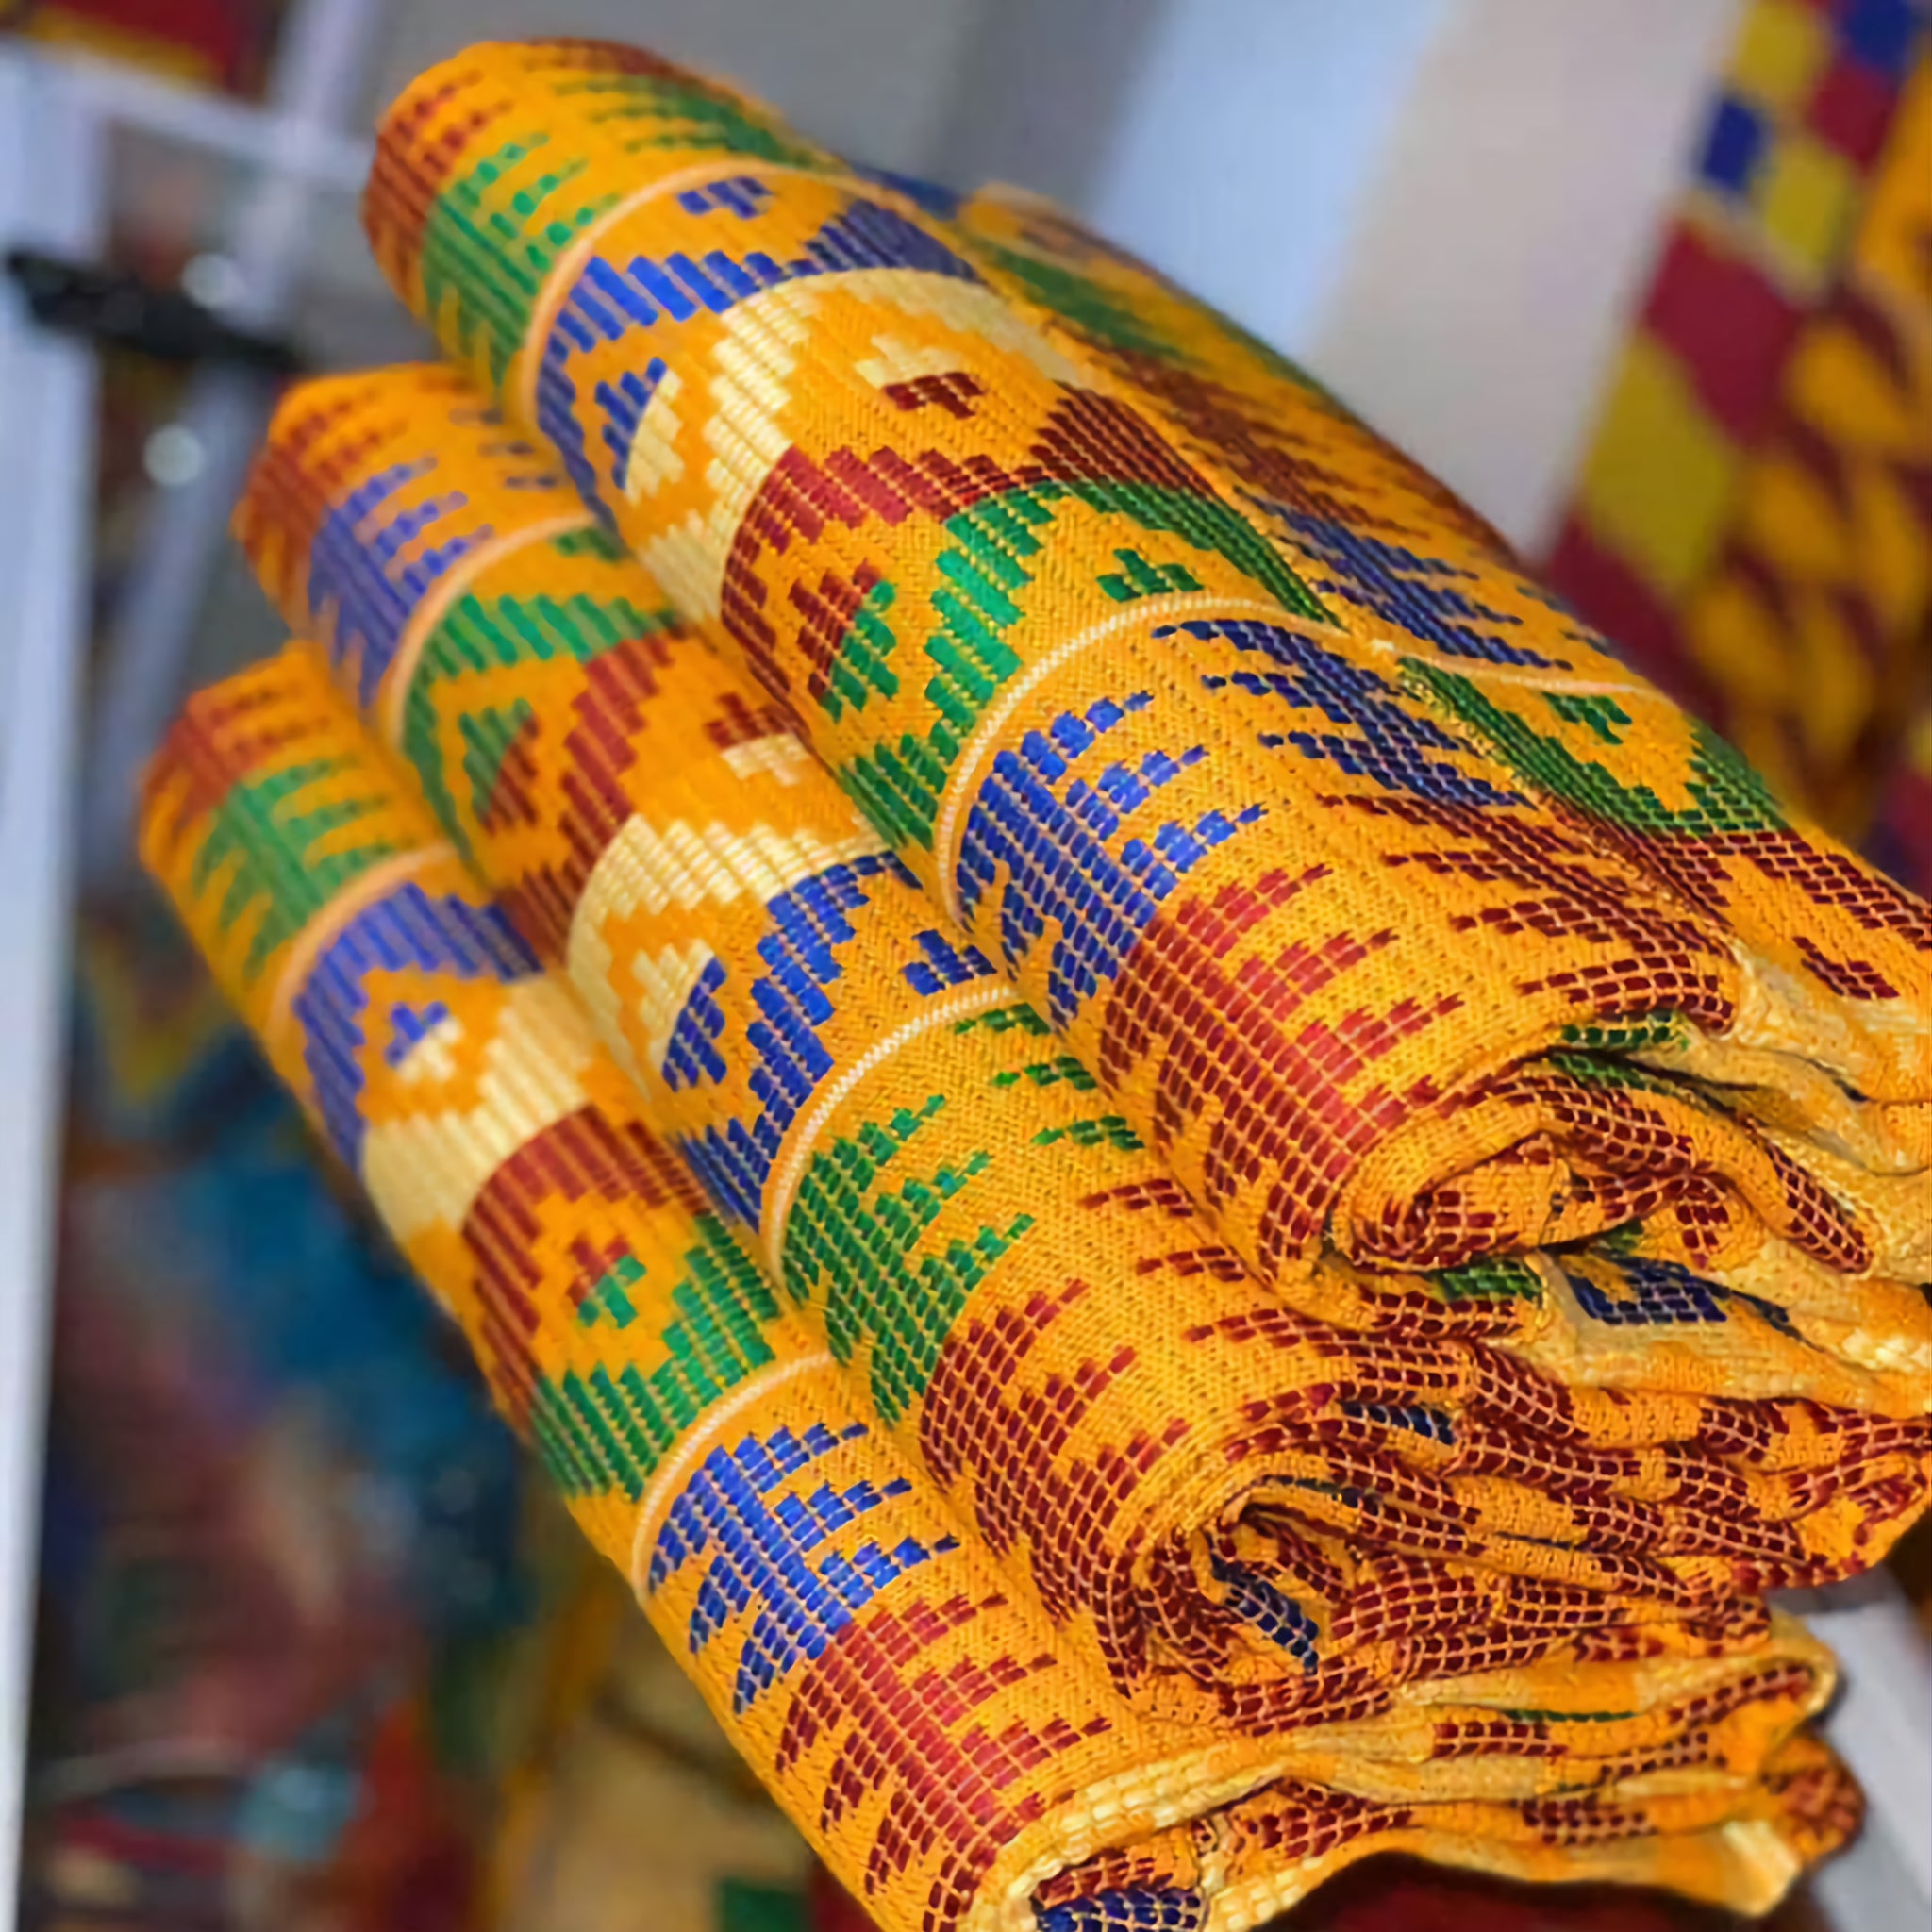 MG Authentic Hand Weaved Kente Cloth A2222